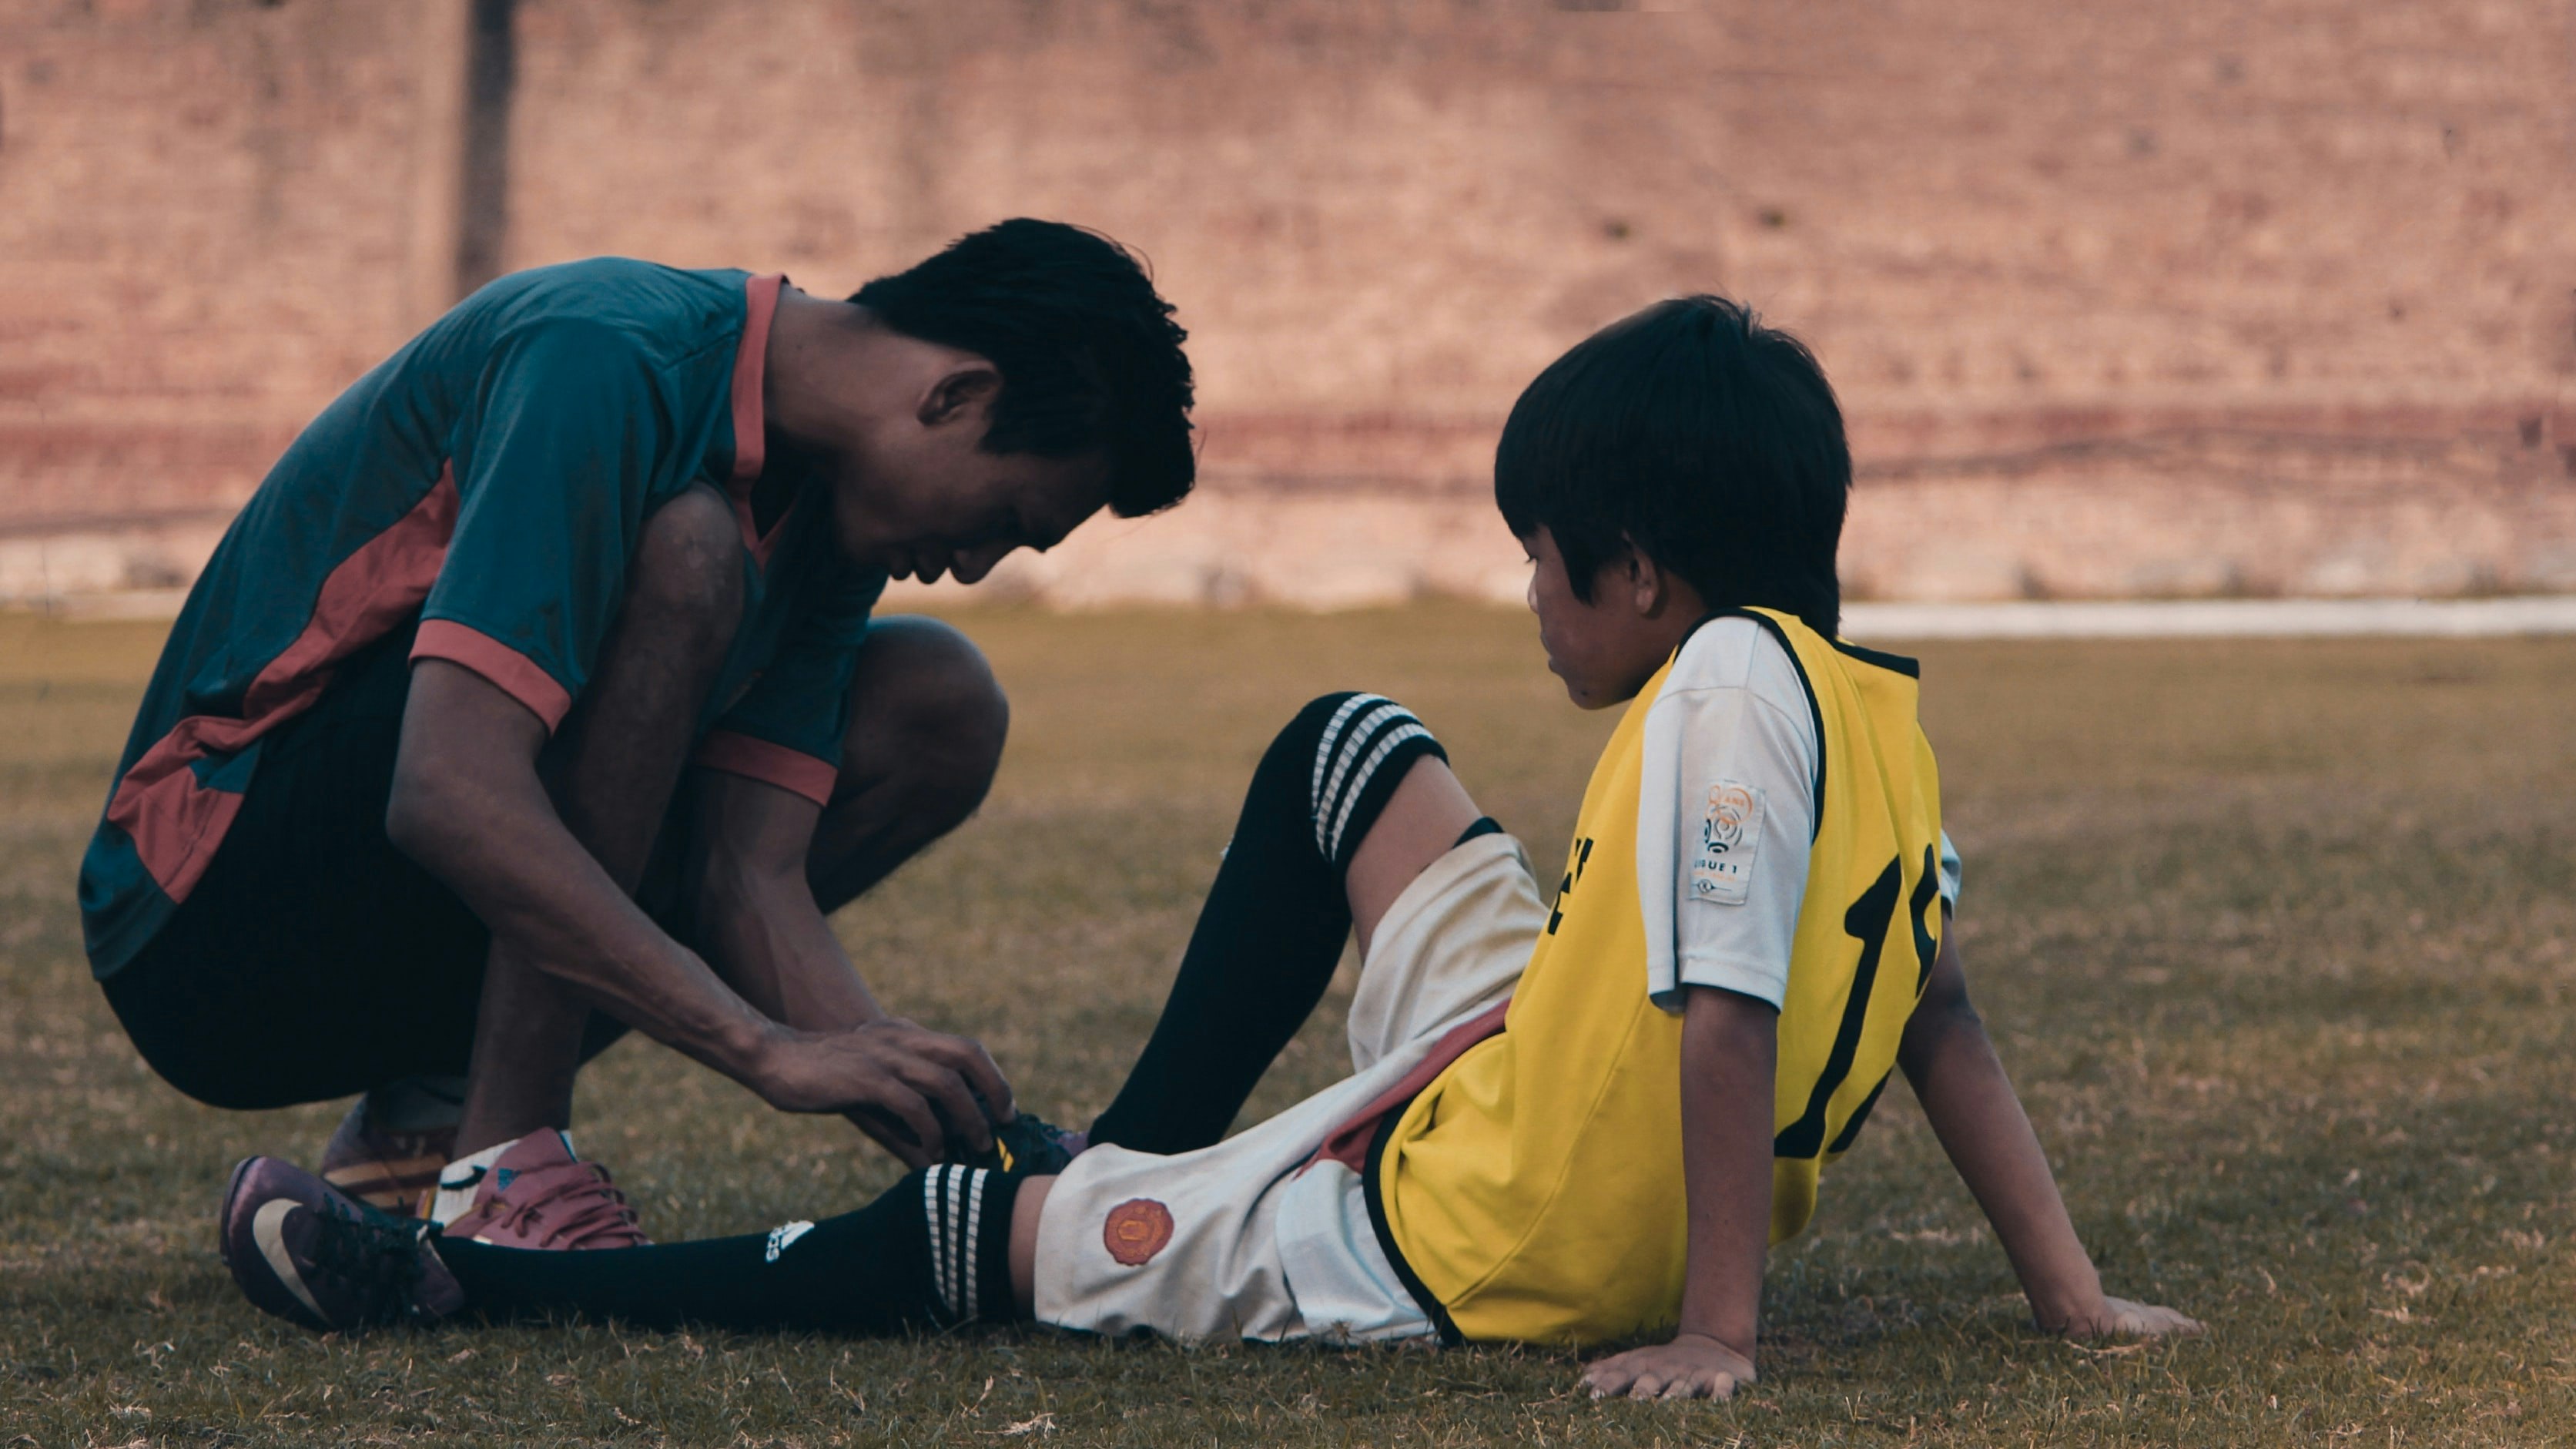 two young soccer players, one with an injury and one helping him